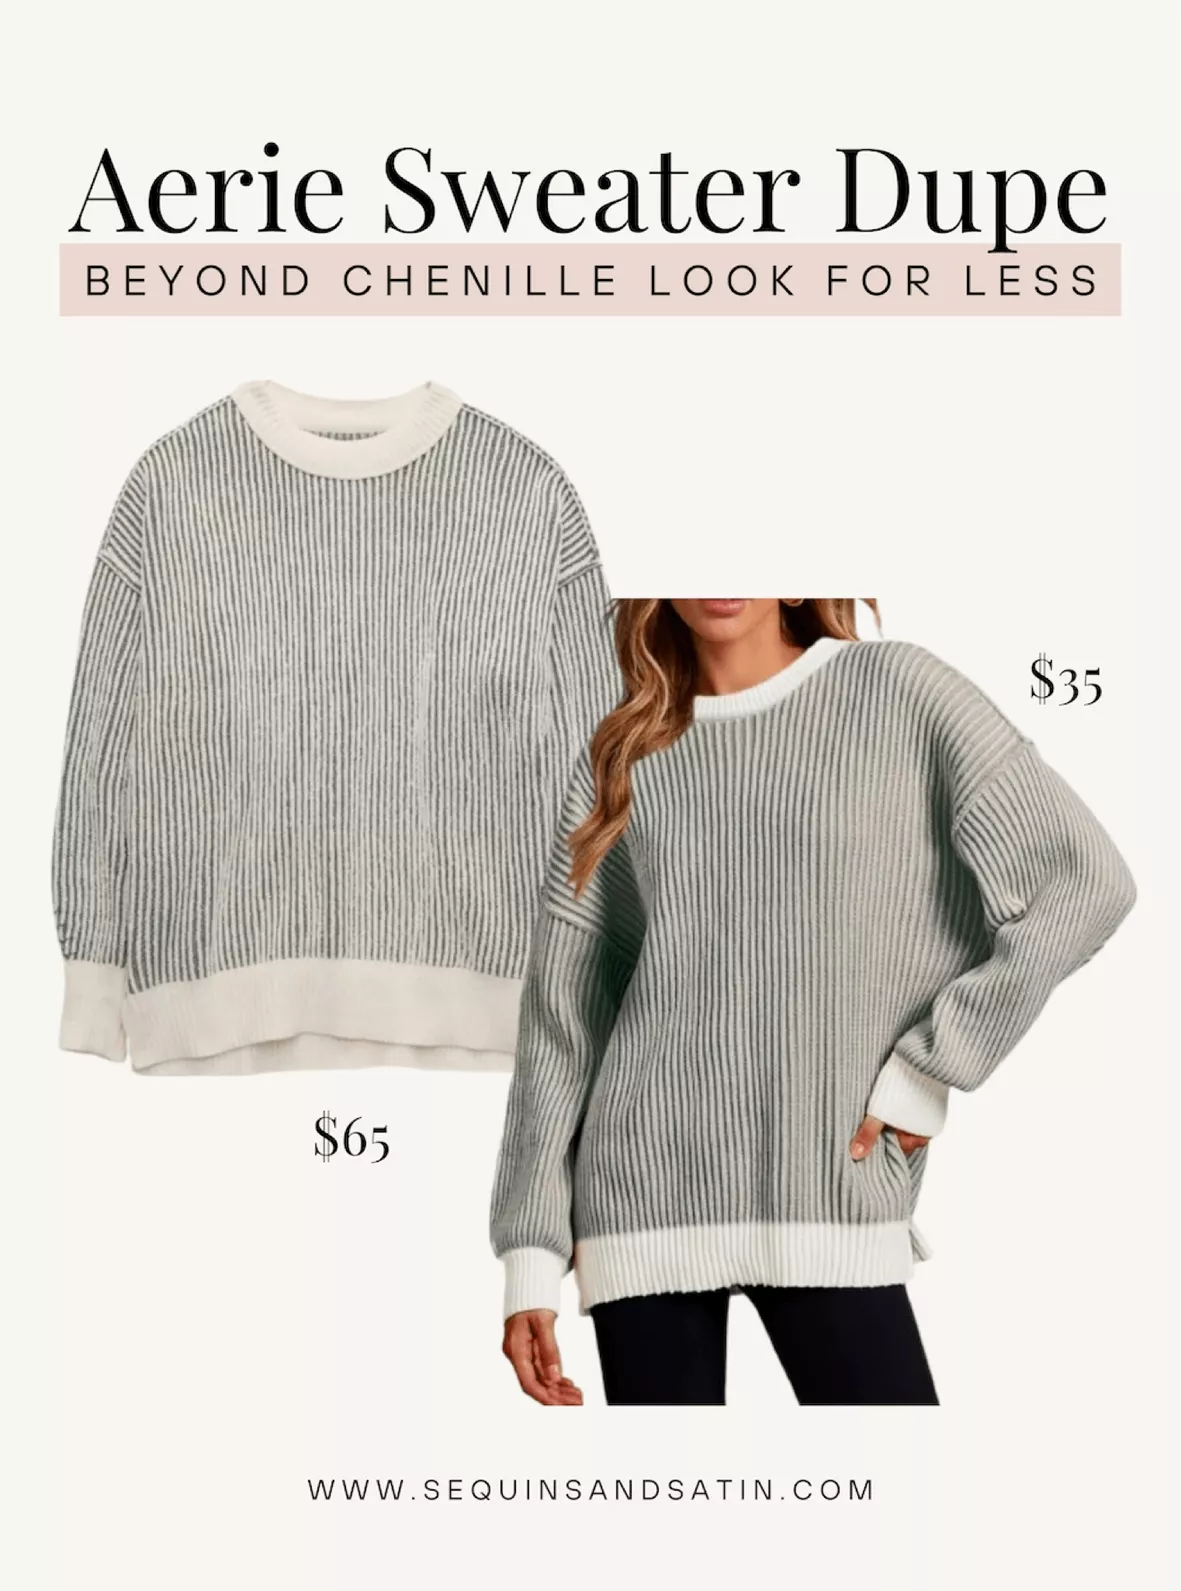 aerie dupes